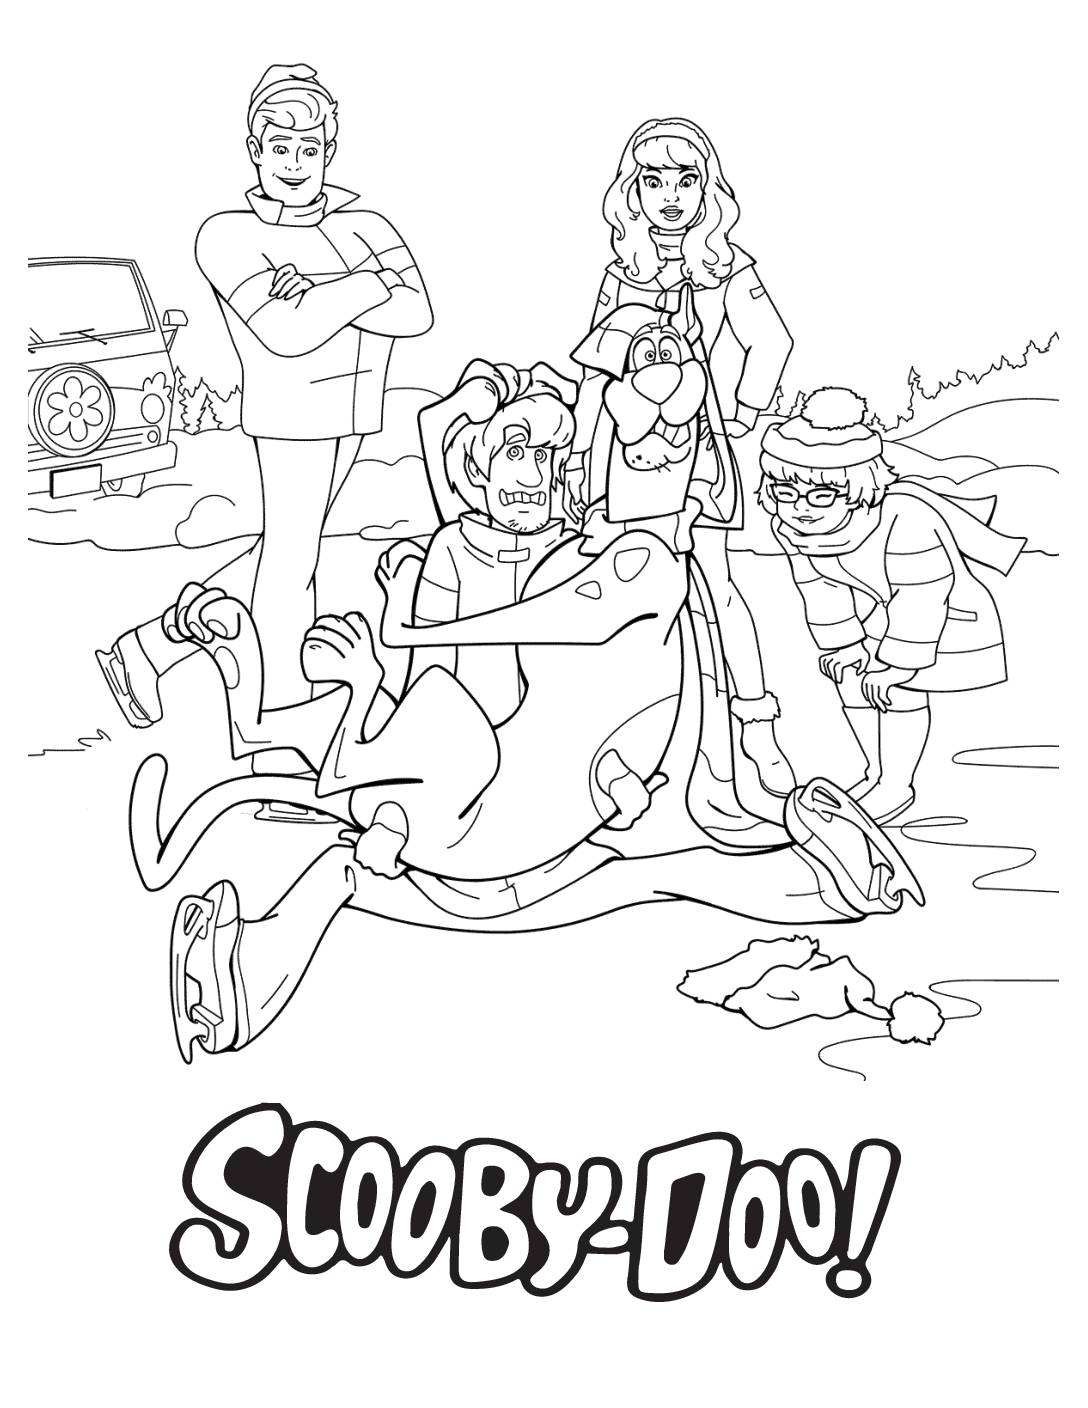 Coloring Page 5 Scooby Doo